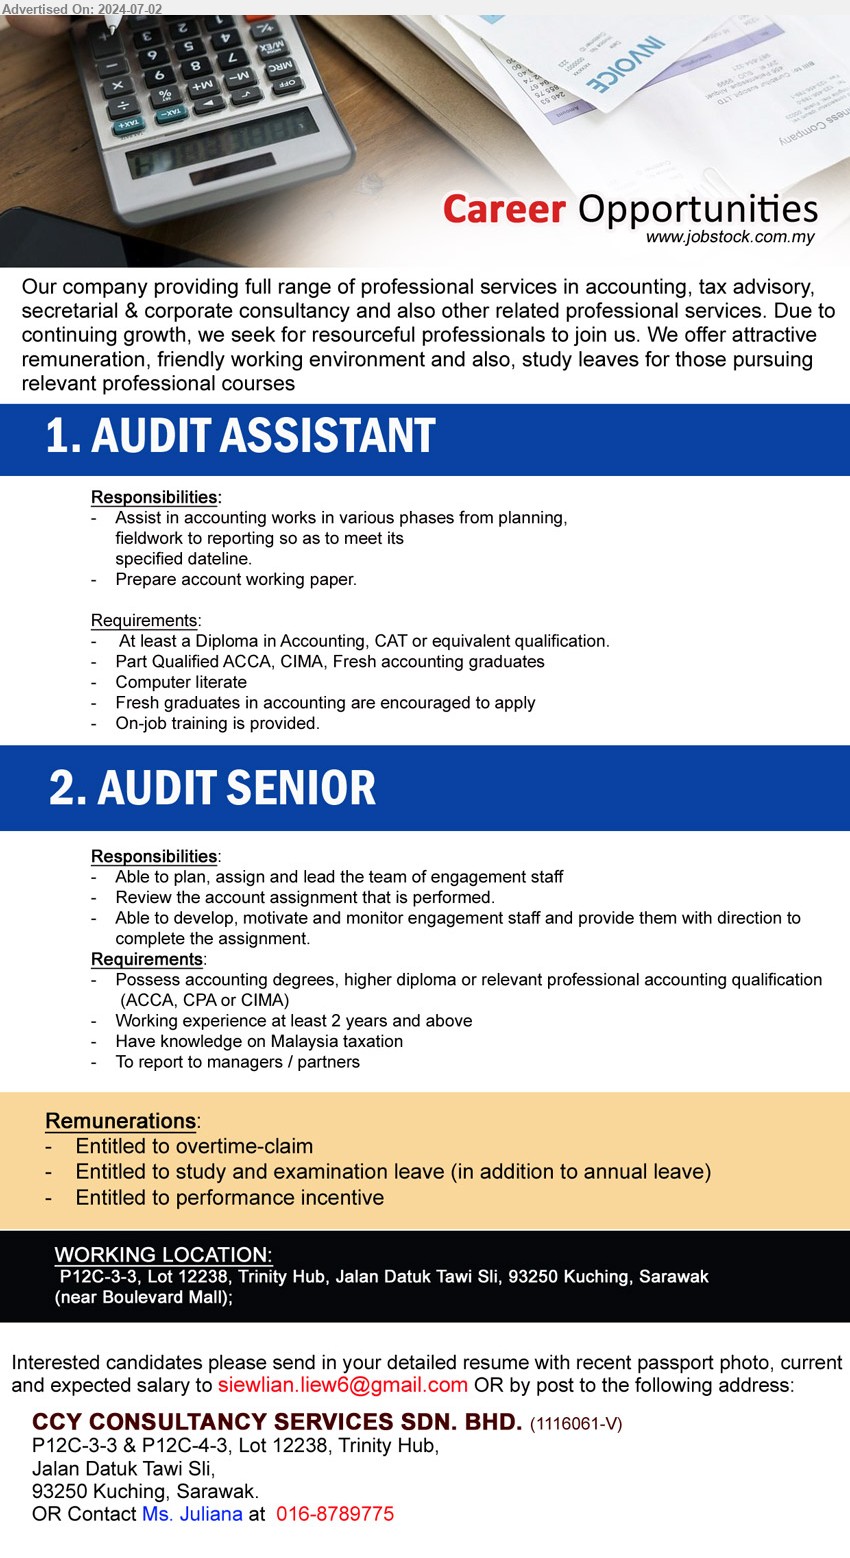 CCY CONSULTANCY SERVICES SDN BHD - 1. AUDIT ASSISTANT  (Kuching), Diploma in Accounting, CAT, Part Qualified ACCA, CIMA, Fresh accounting graduates,...
2. AUDIT SENIOR  (Kuching), Possess accounting degrees, higher diploma or relevant professional accounting qualification
 (ACCA, CPA or CIMA),...
Call 016-8789775 / Email resume to ...
